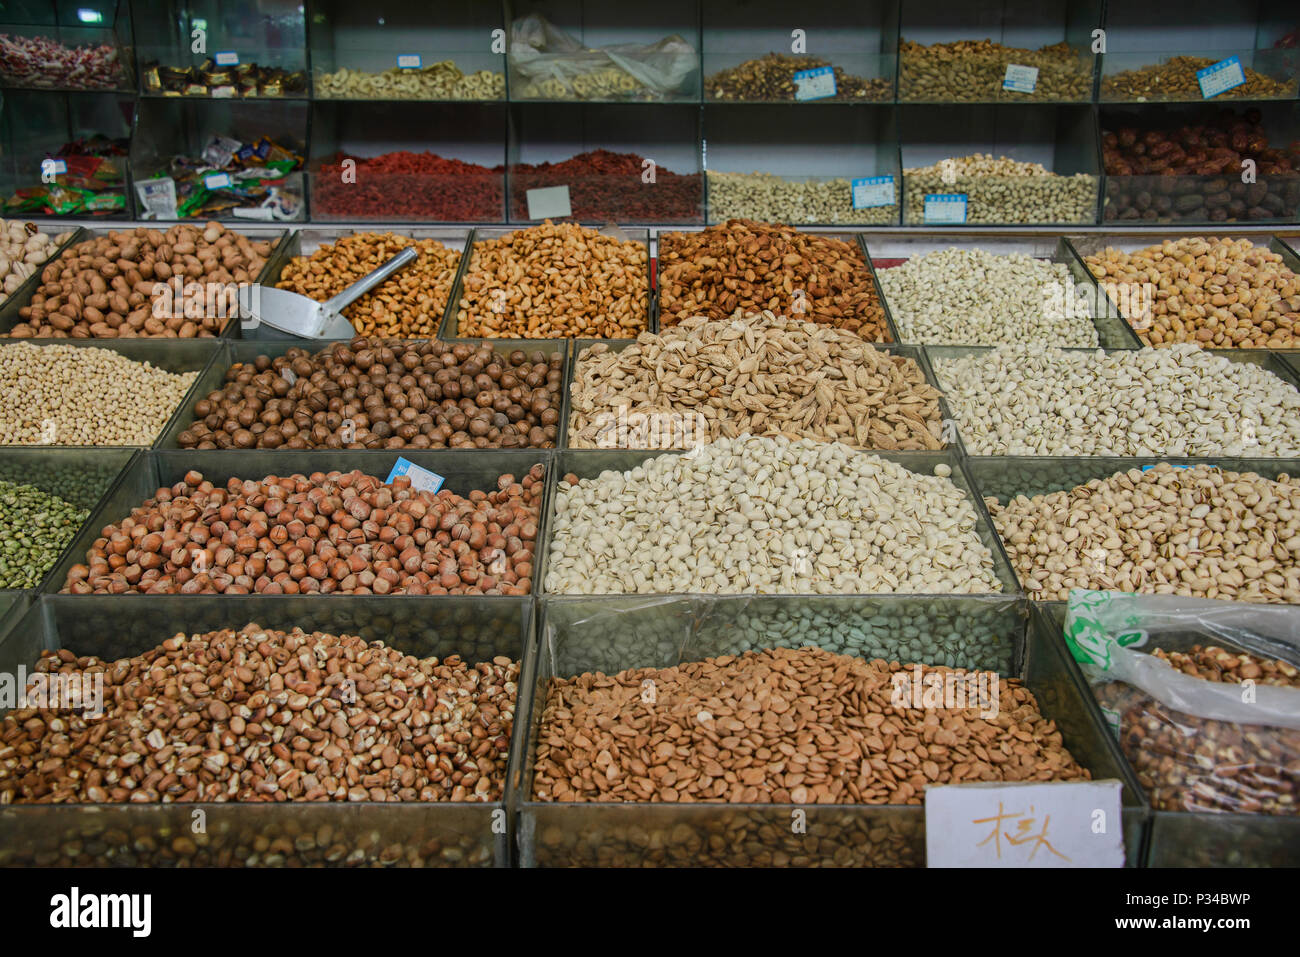 Raisins, nuts, and dried fruit for sale at the market in Dunhuang, Gansu, China Stock Photo